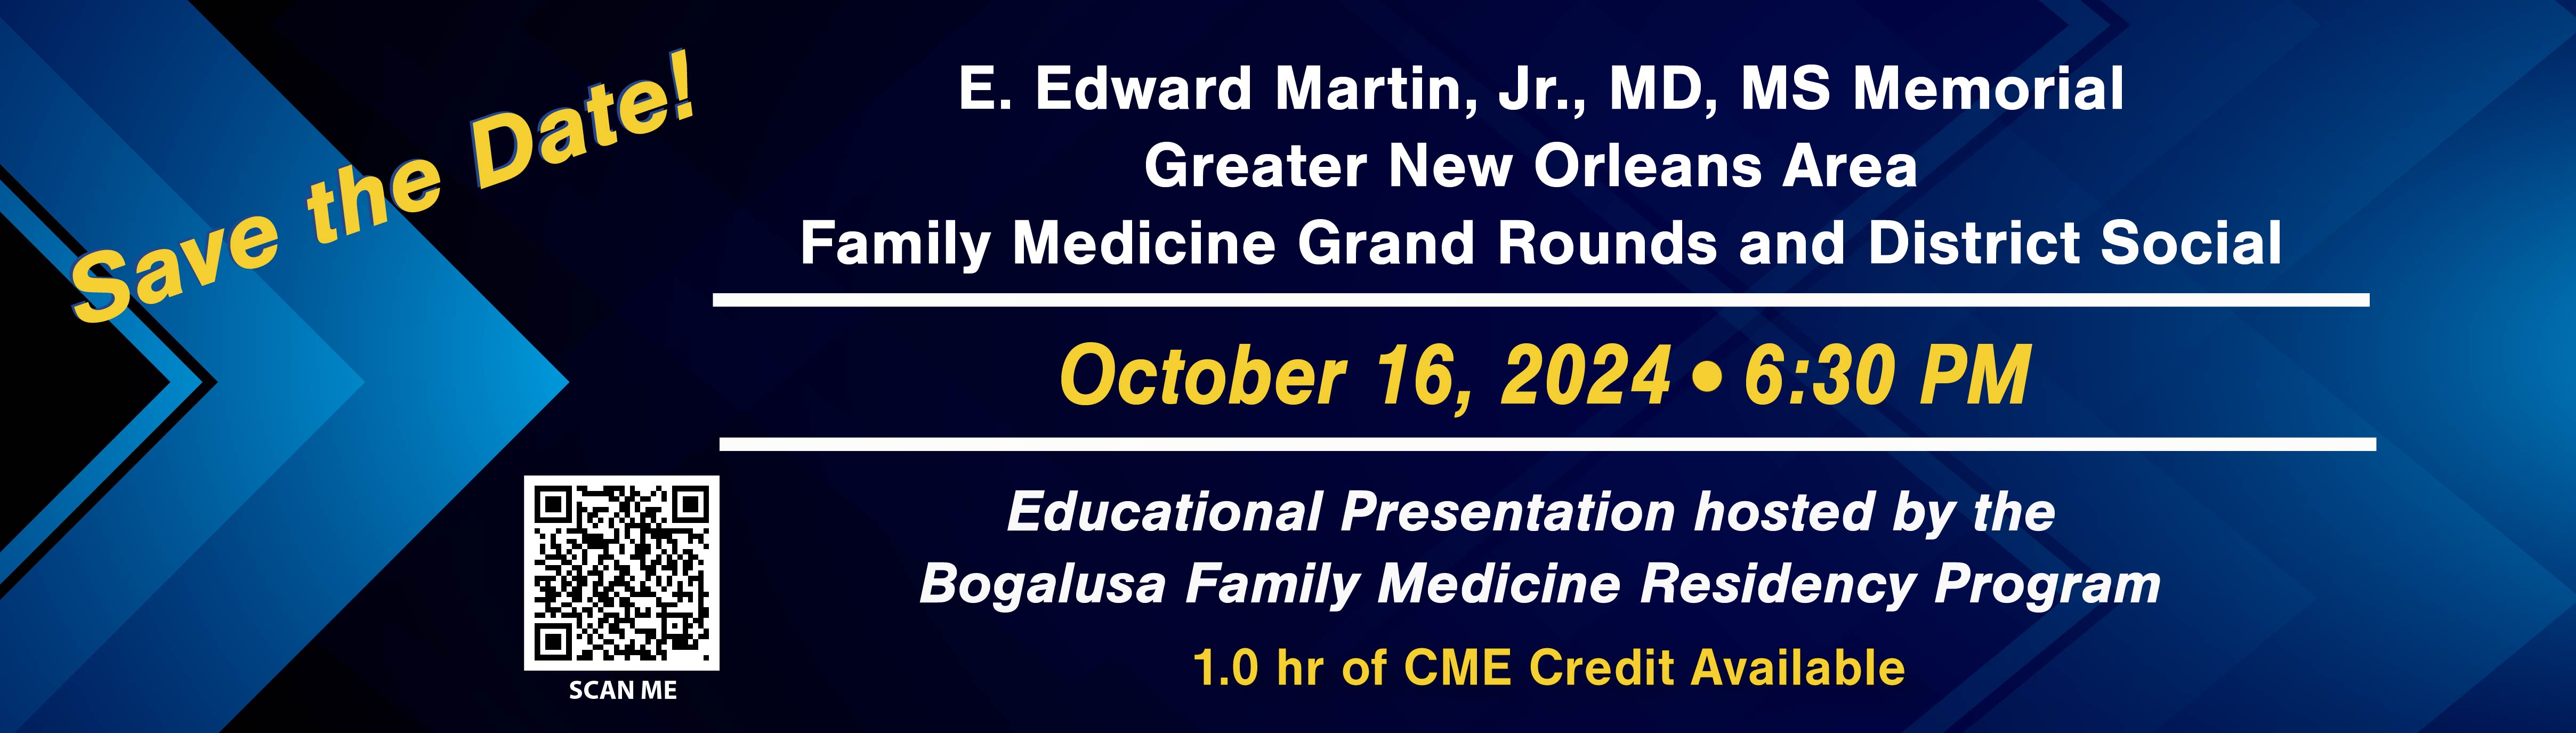 Grand Rounds web banner Save the Date 01